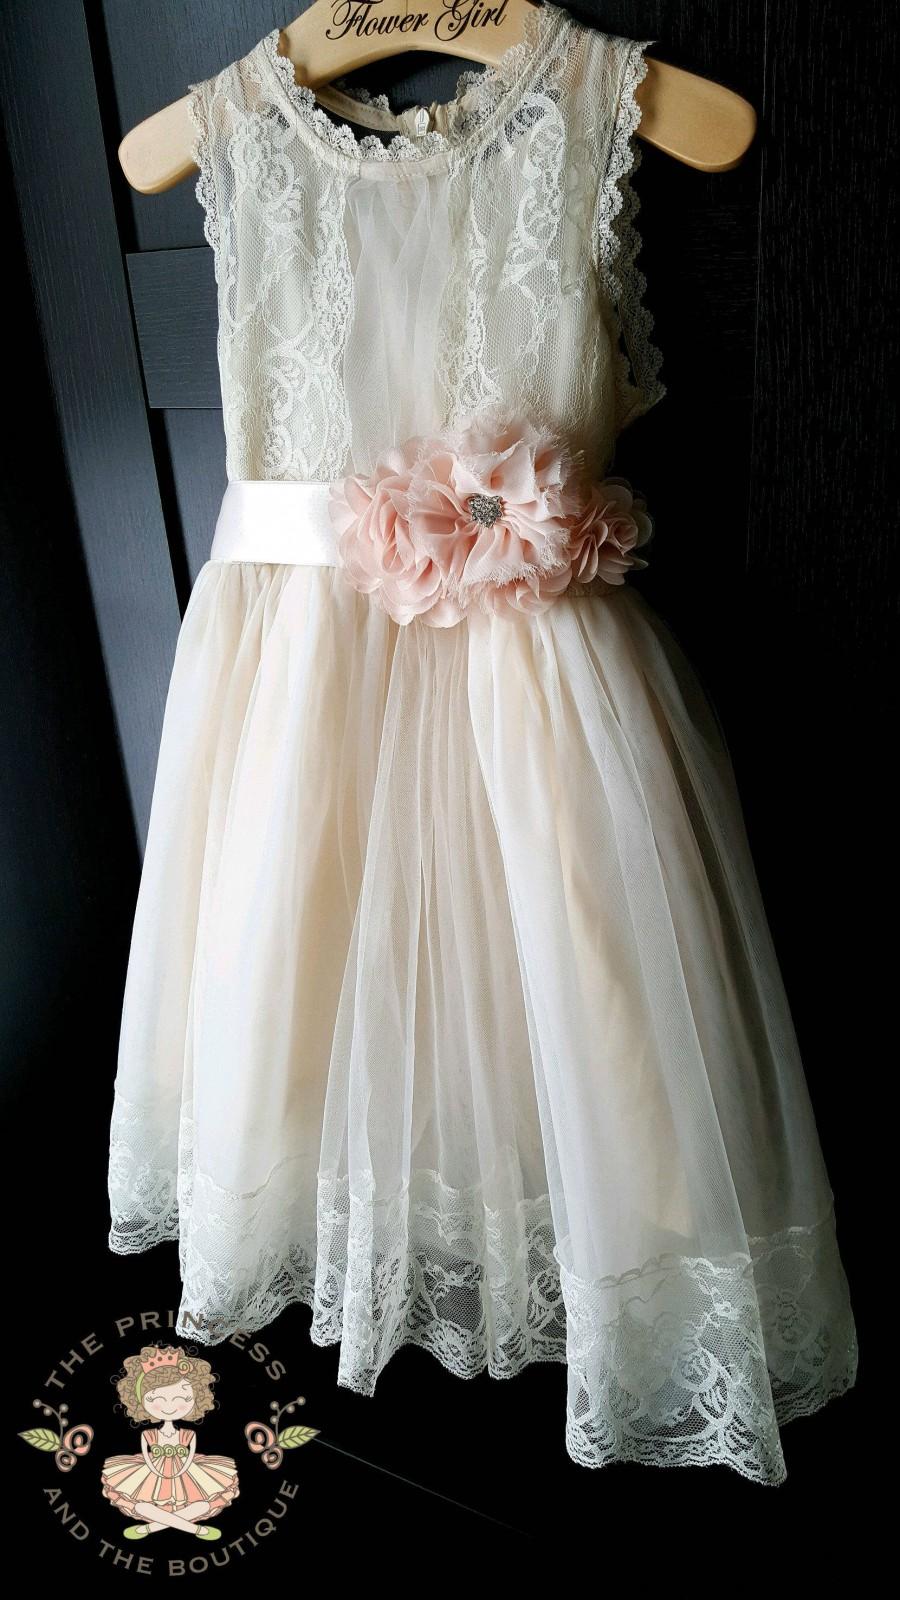 Mariage - Flower girl dress champagne with blush sash, flower girl dress lace, blush flower girl dress, girls dresses, flower girl dress blush